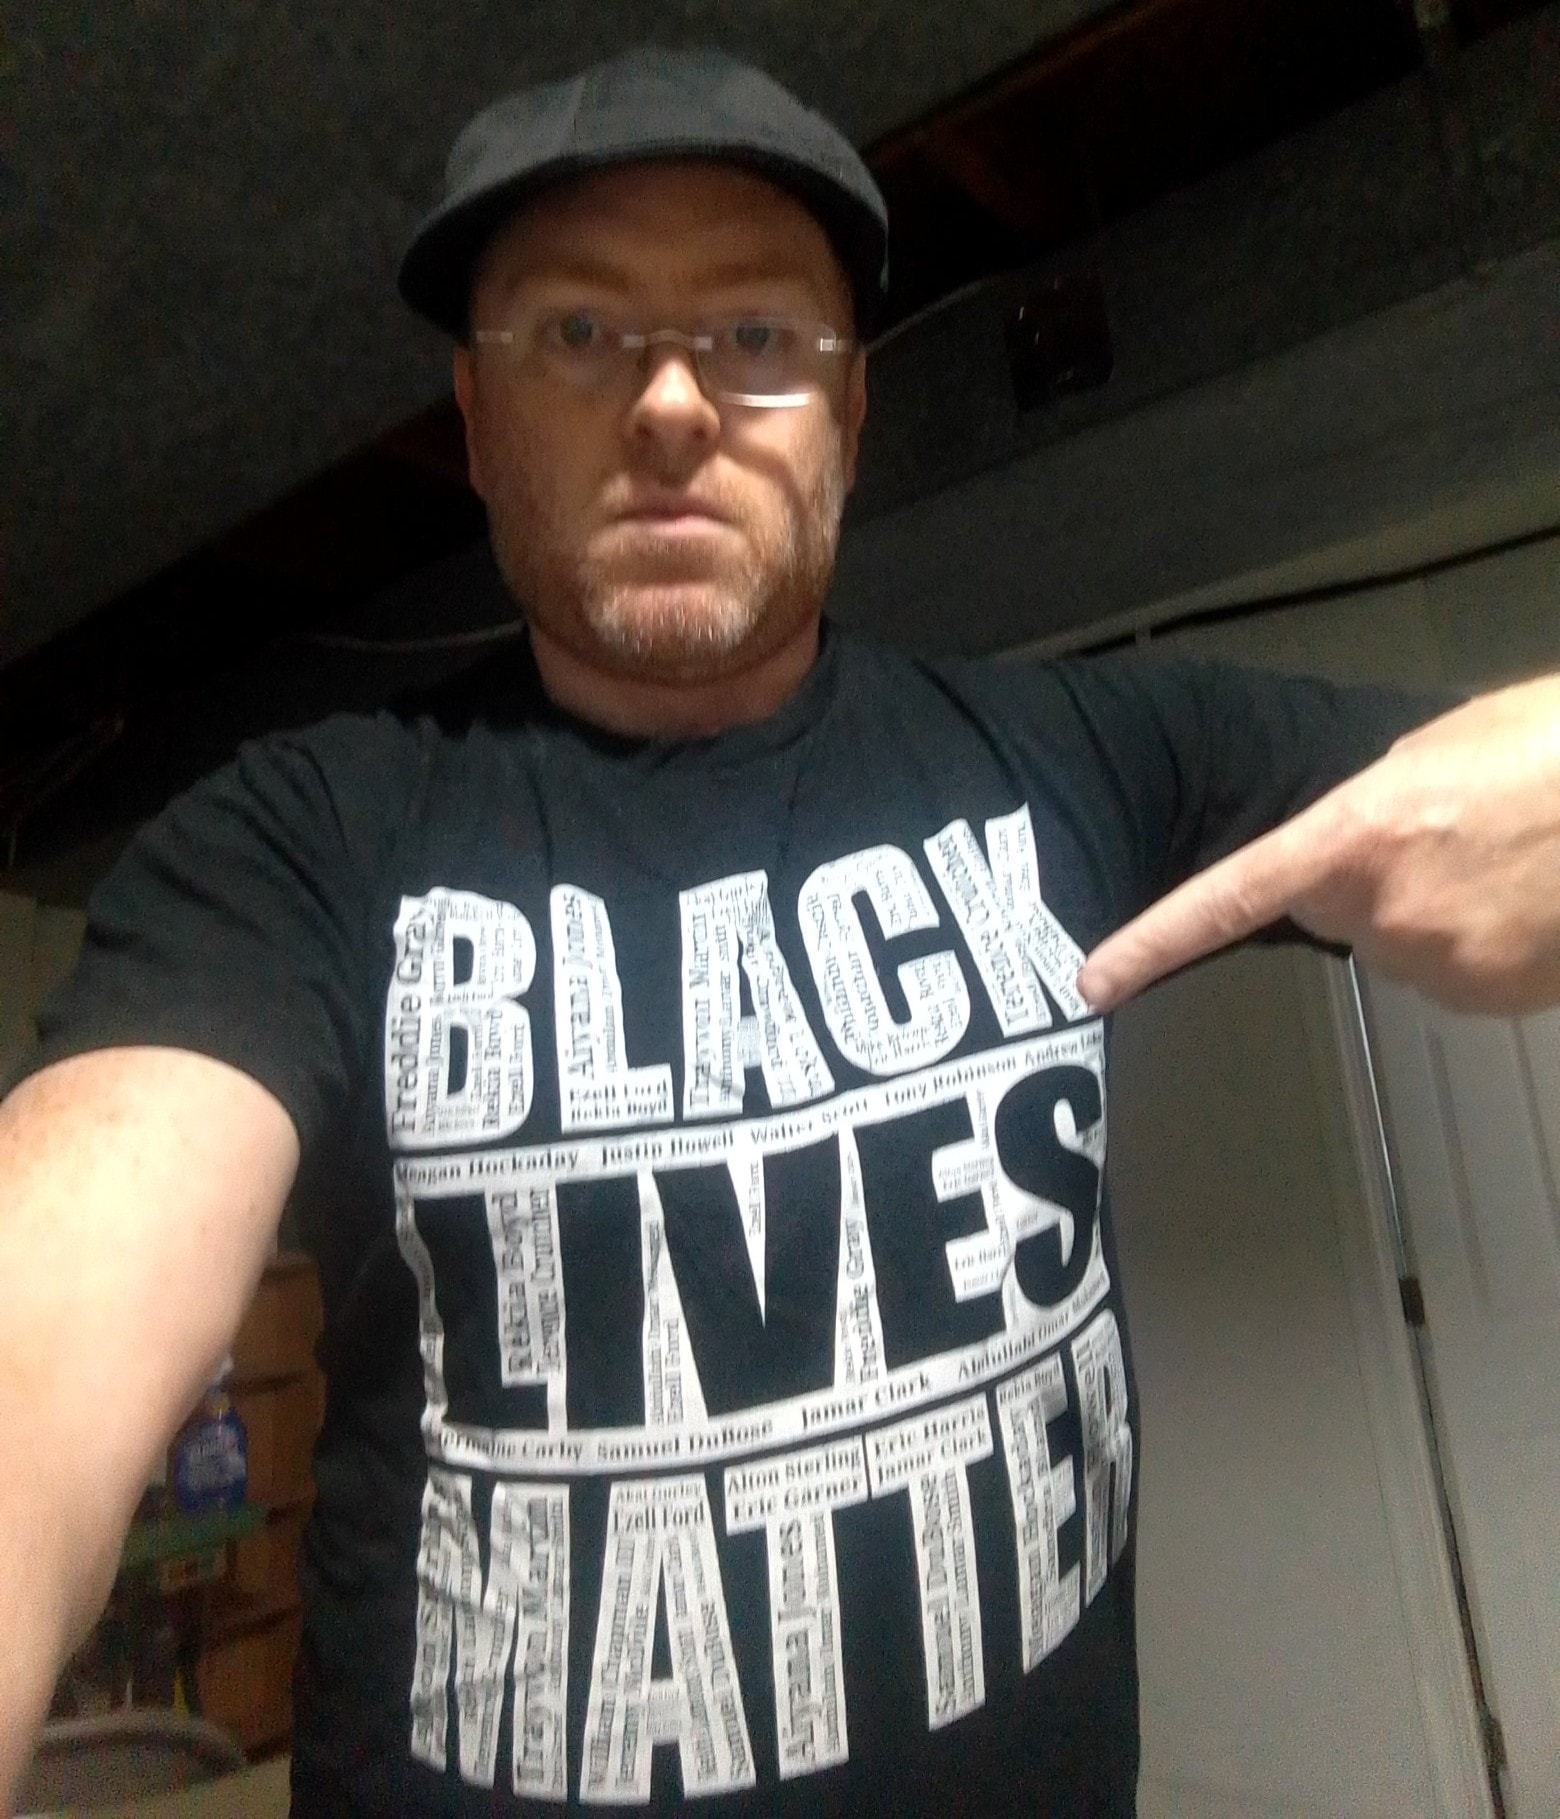 Brian believes Black lives matter.  Period.  Full stop.